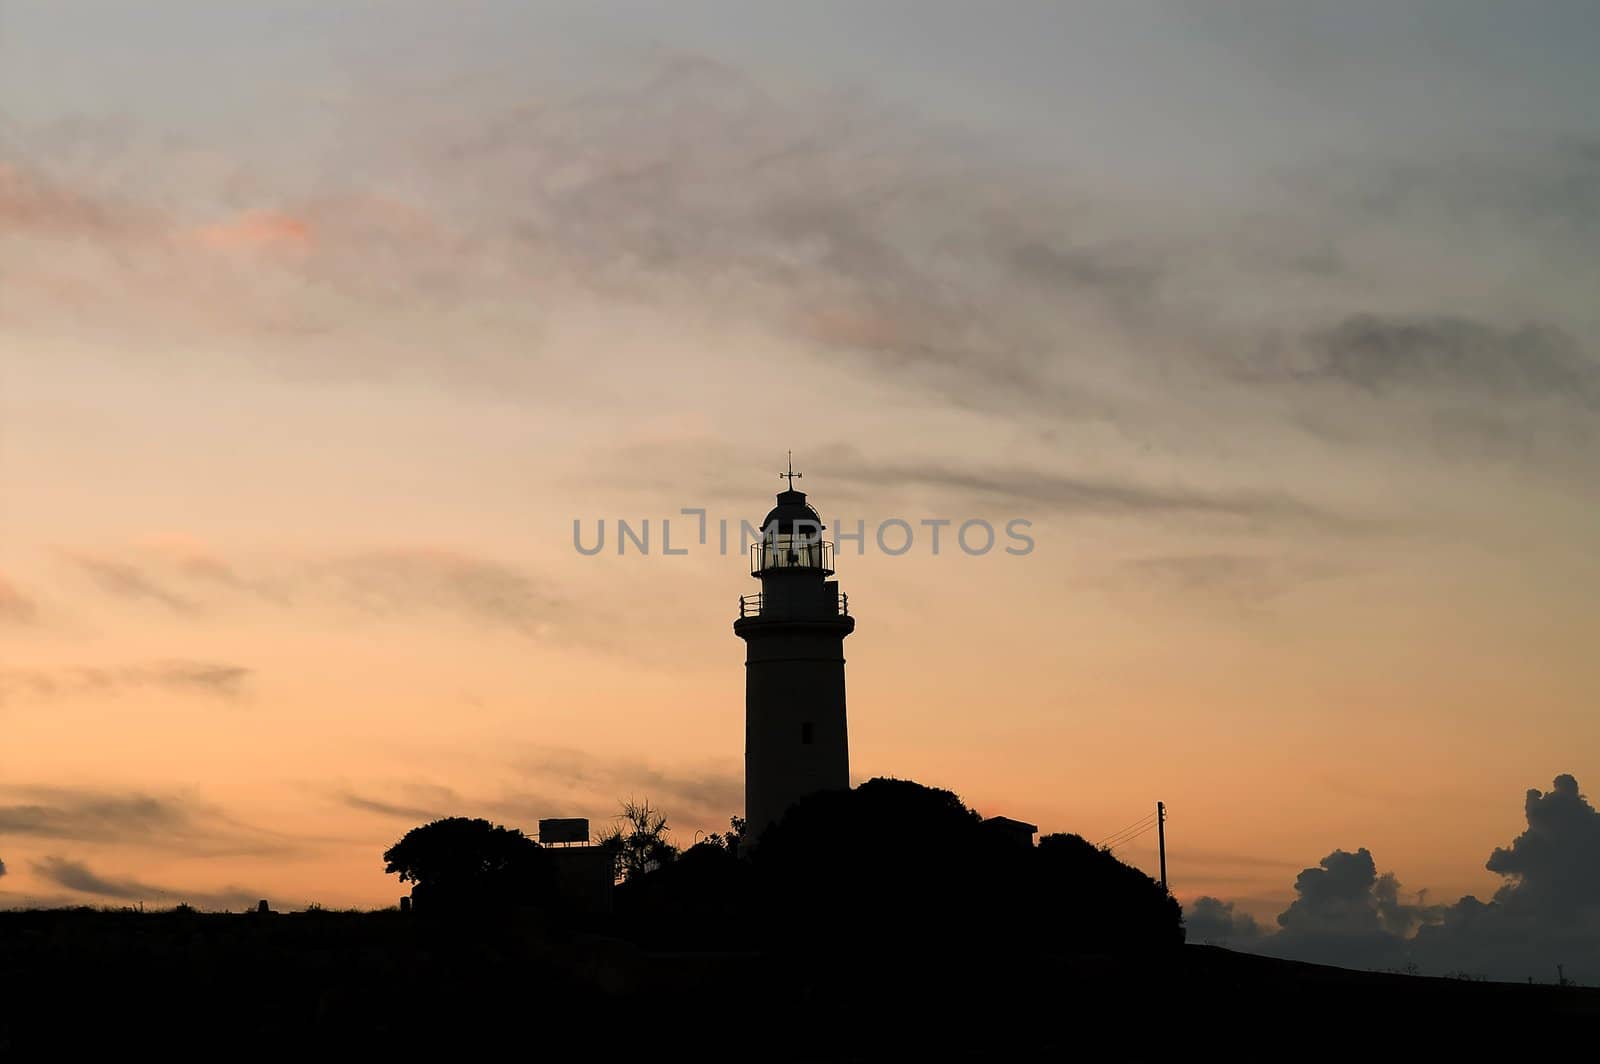 Lighthouse is silhouetted against a sunset